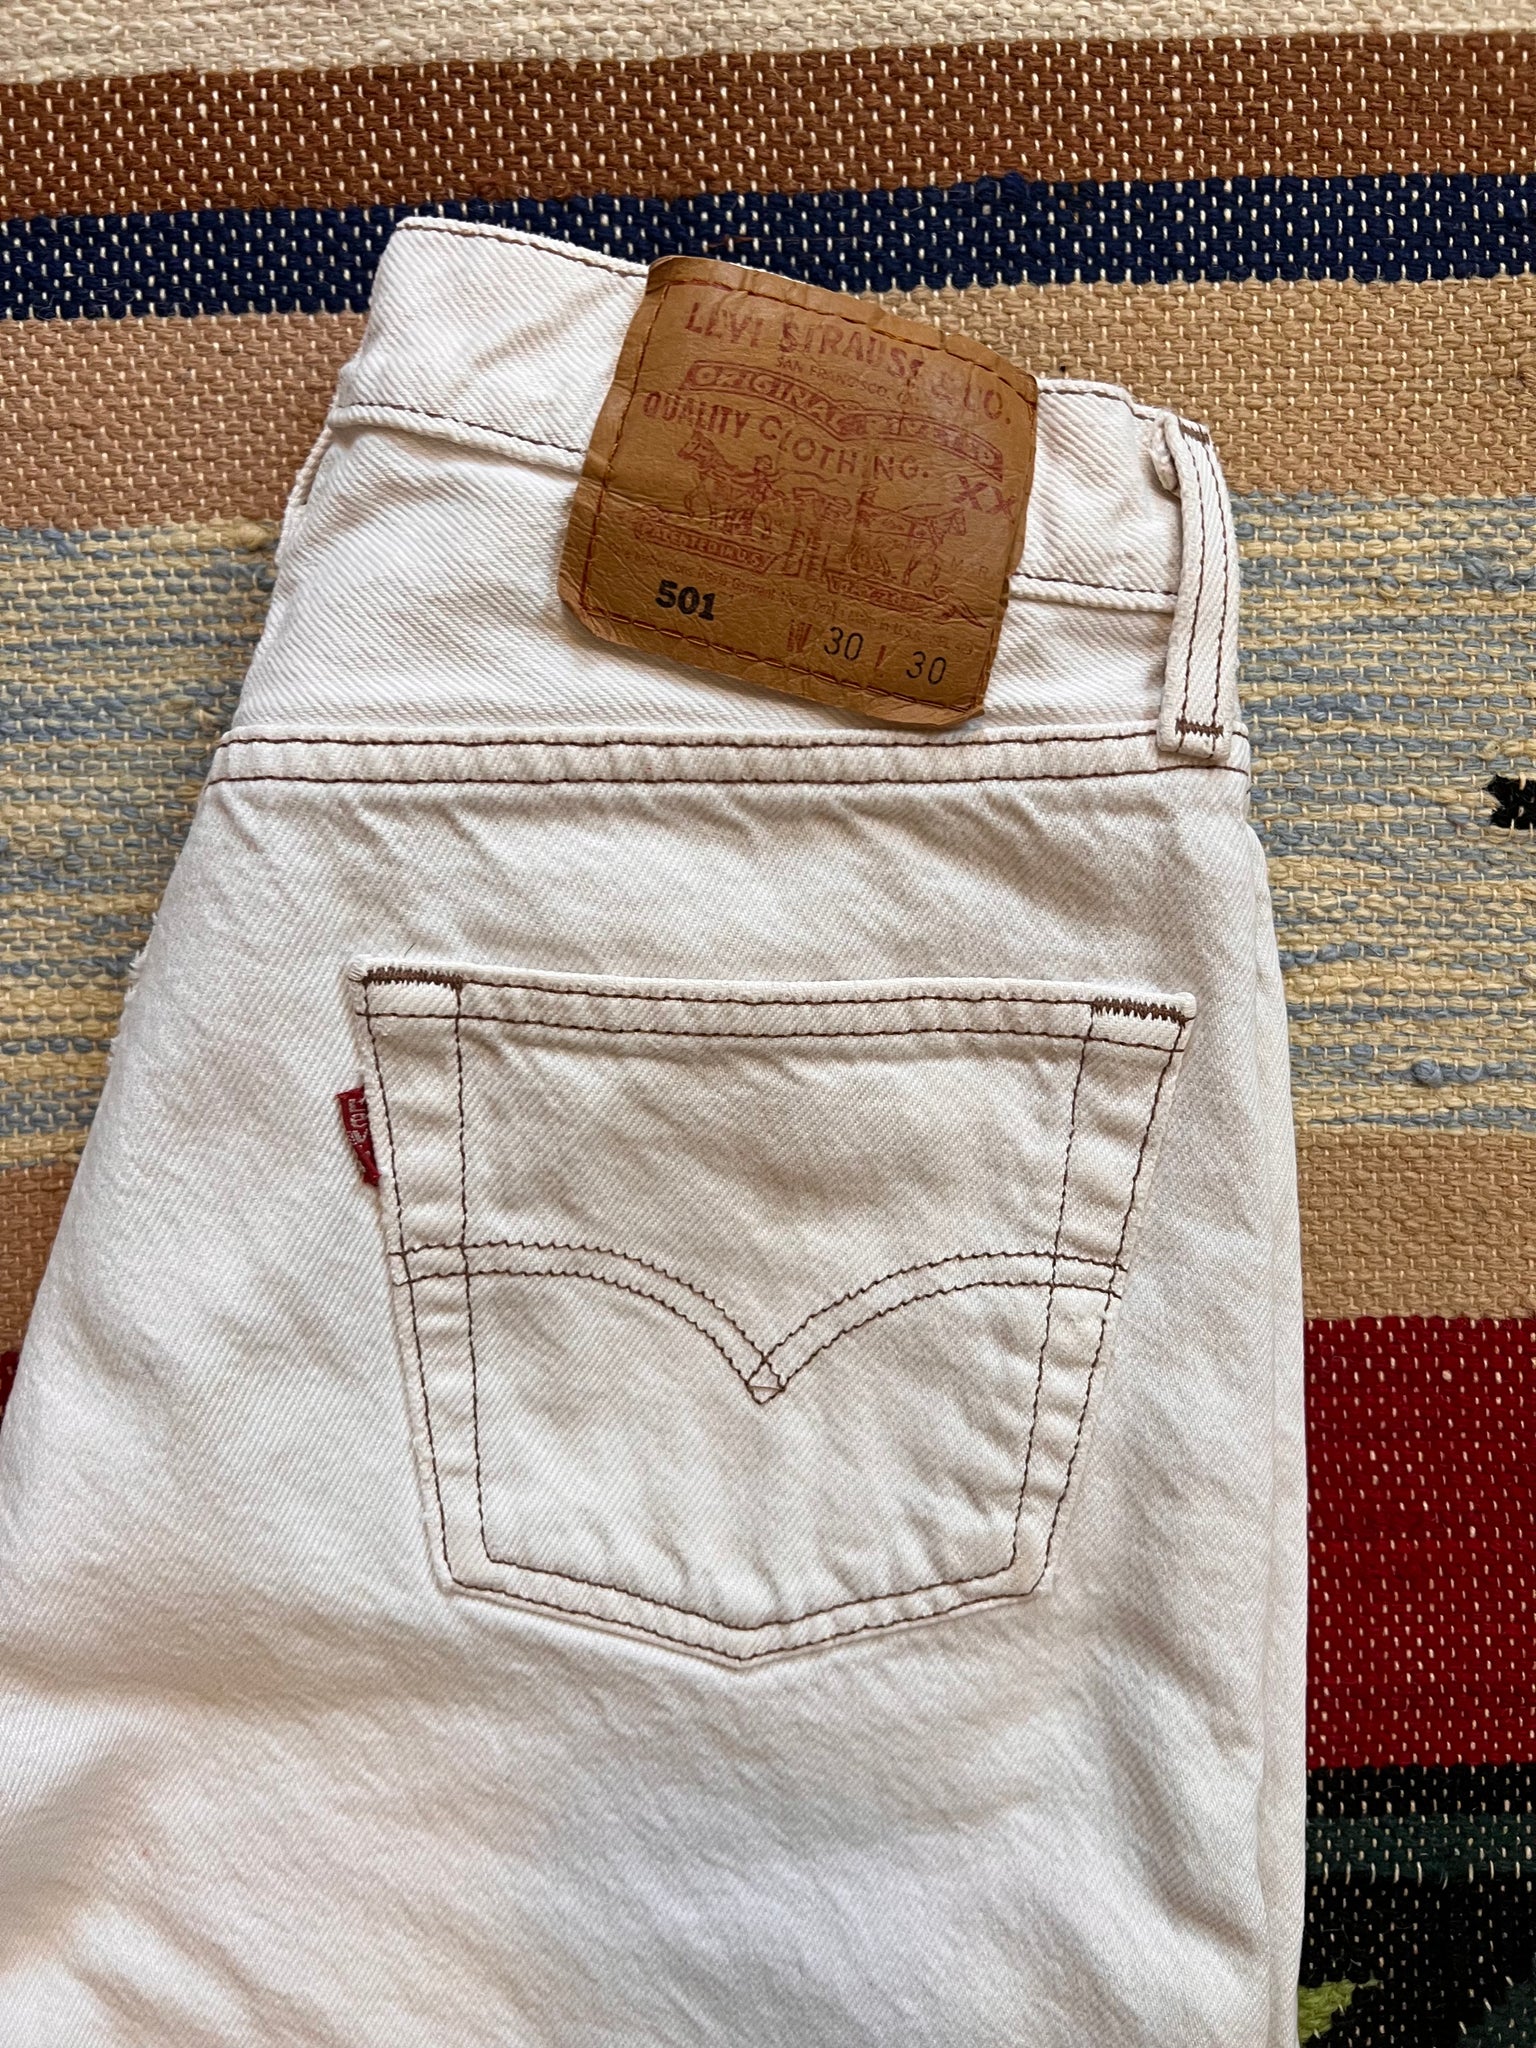 LEVI'S 501 Vintage Cream Button Fly Jeans 28” x 30” – Chambers Vintage